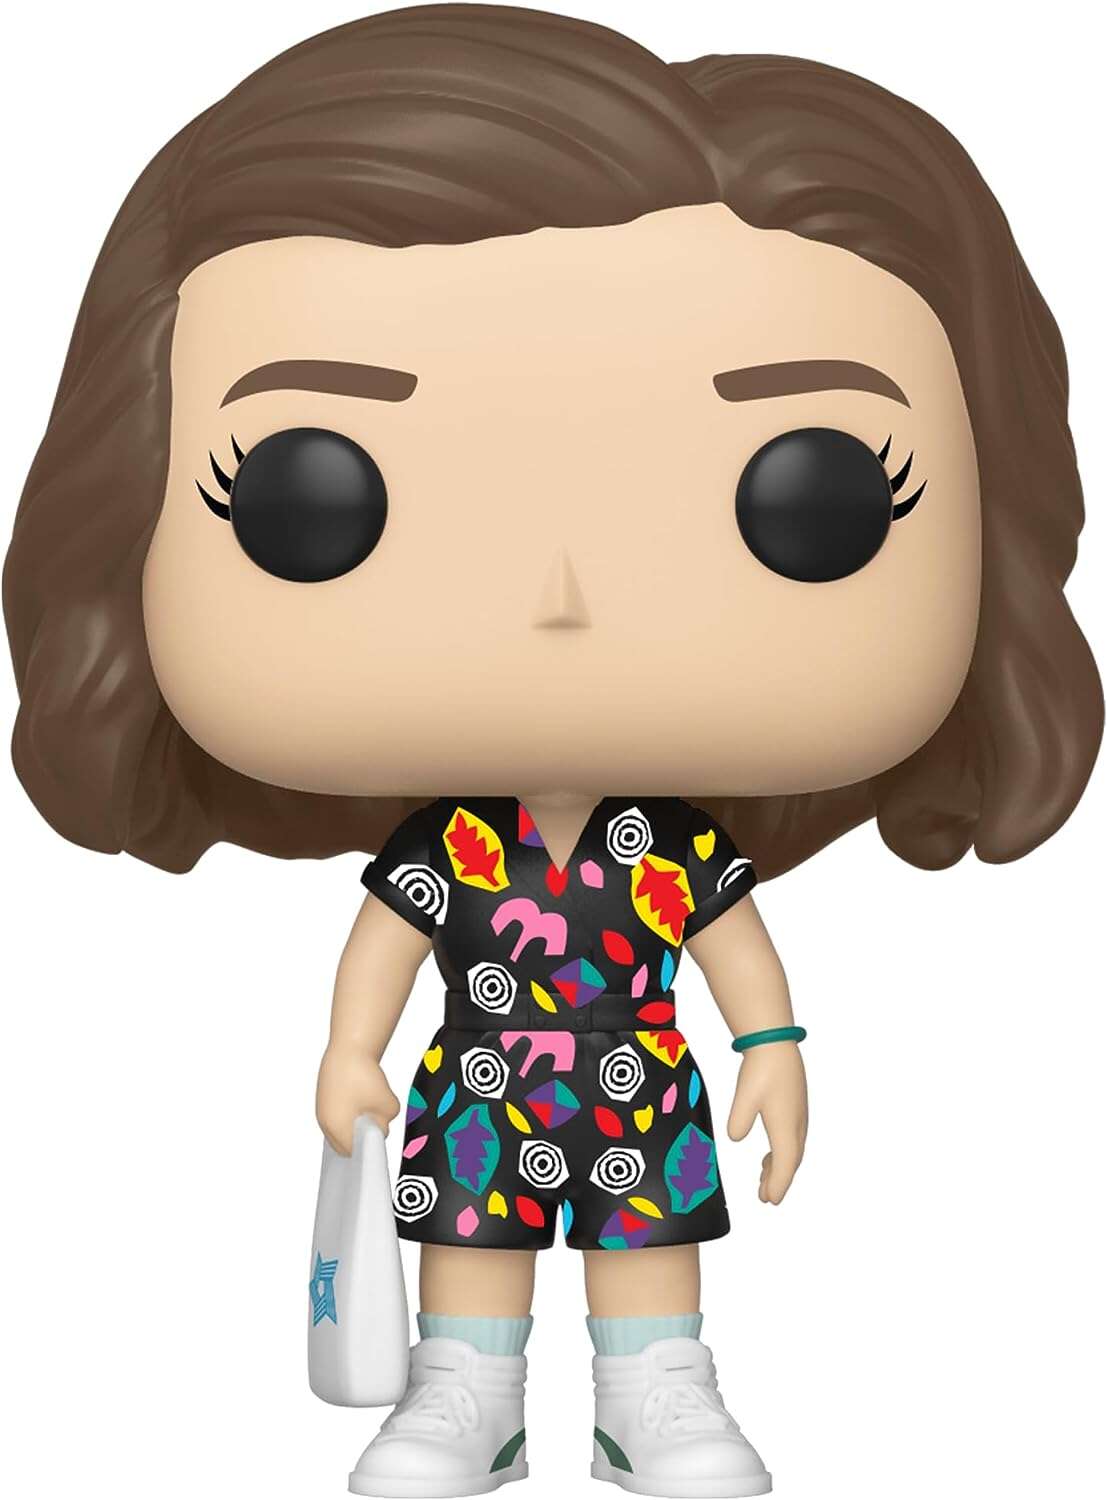 Figurina - Stranger Things - Eleven in Mall Outfit | Funko